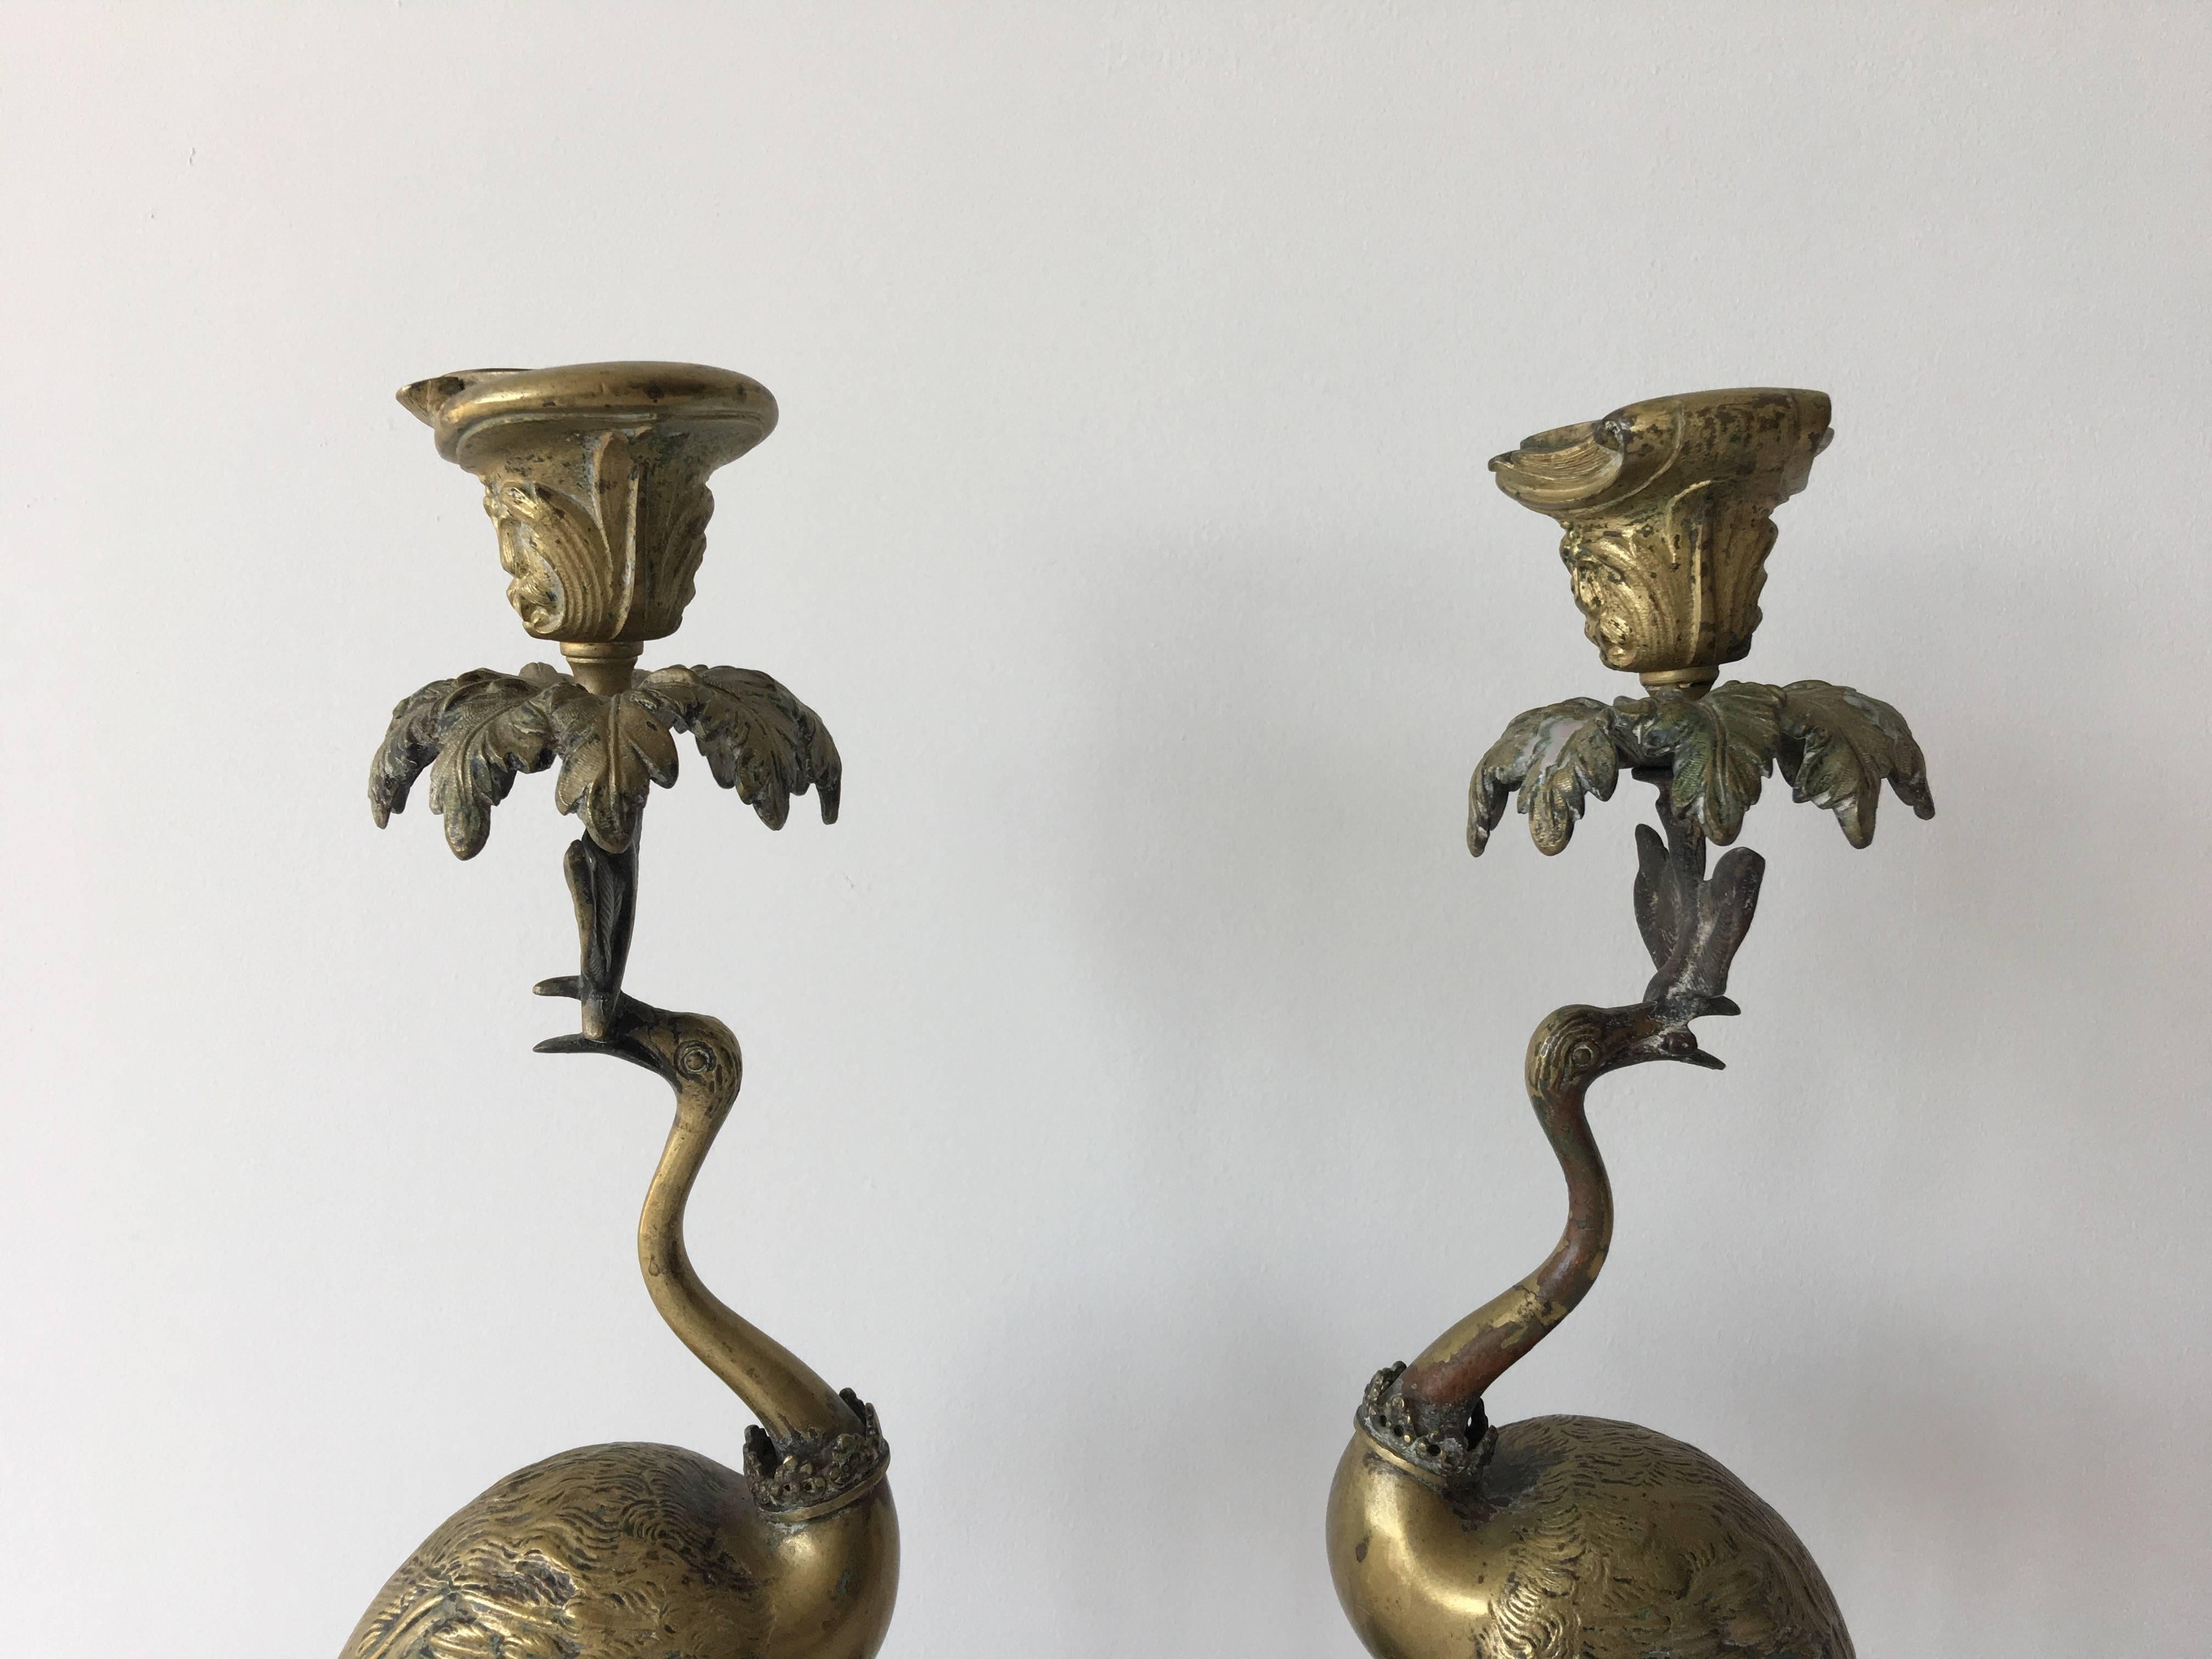 Offered is an absolutely stunning, rare, antique 19th century pair of brass/bronze ostrich candleholders. They have beautiful detailing! Above their heads are palm trees. They are each wearing crowns around the necks. Along the base, they're